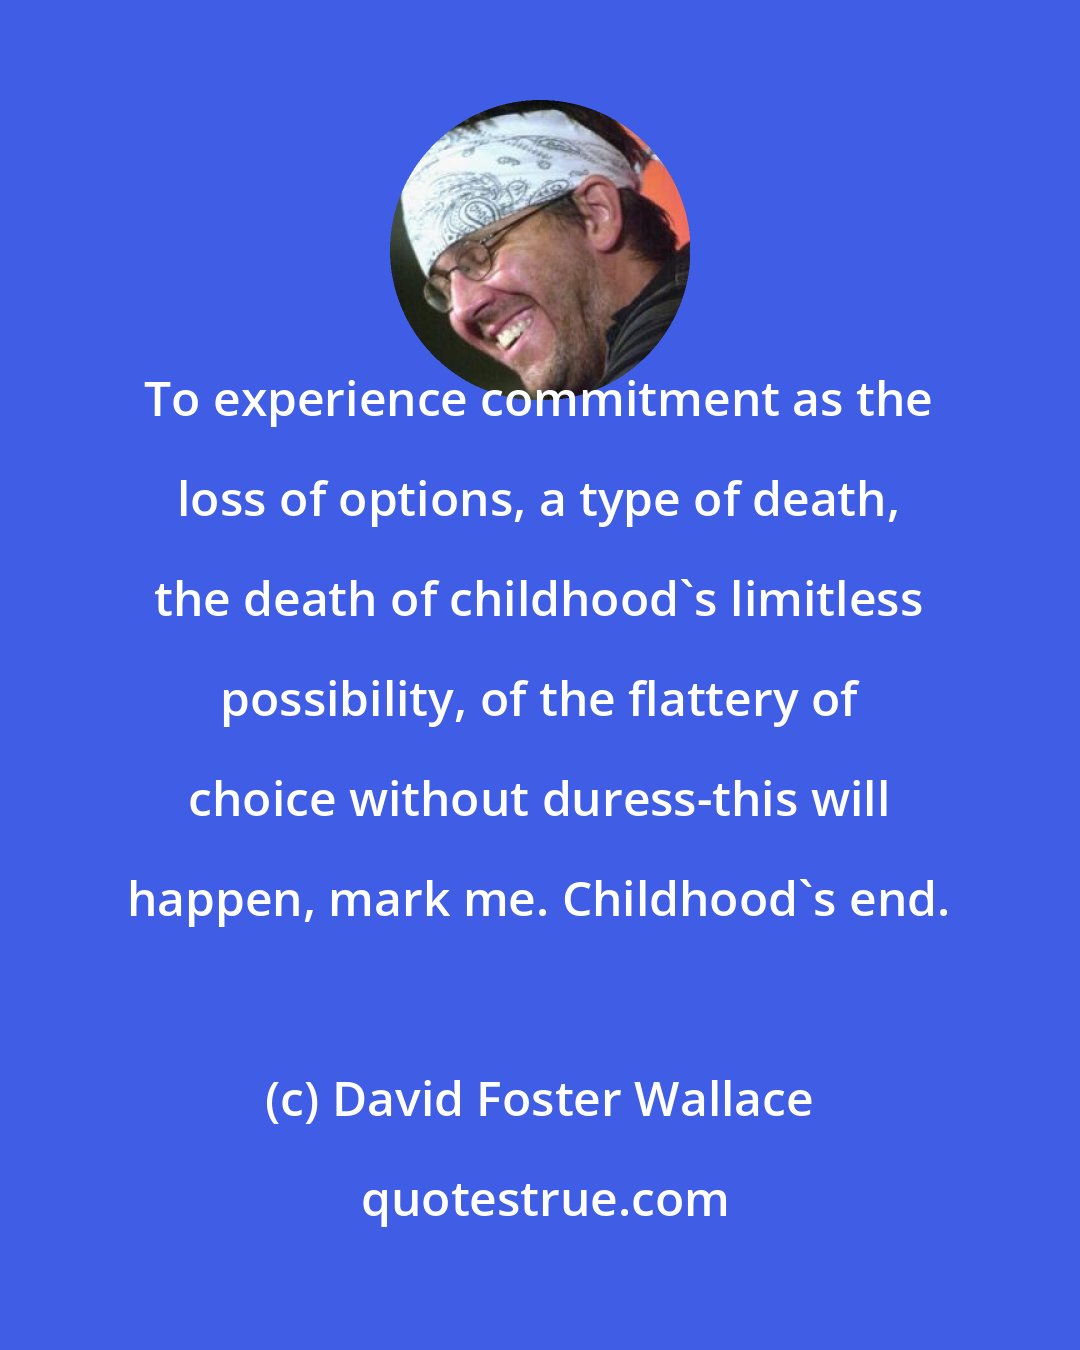 David Foster Wallace: To experience commitment as the loss of options, a type of death, the death of childhood's limitless possibility, of the flattery of choice without duress-this will happen, mark me. Childhood's end.